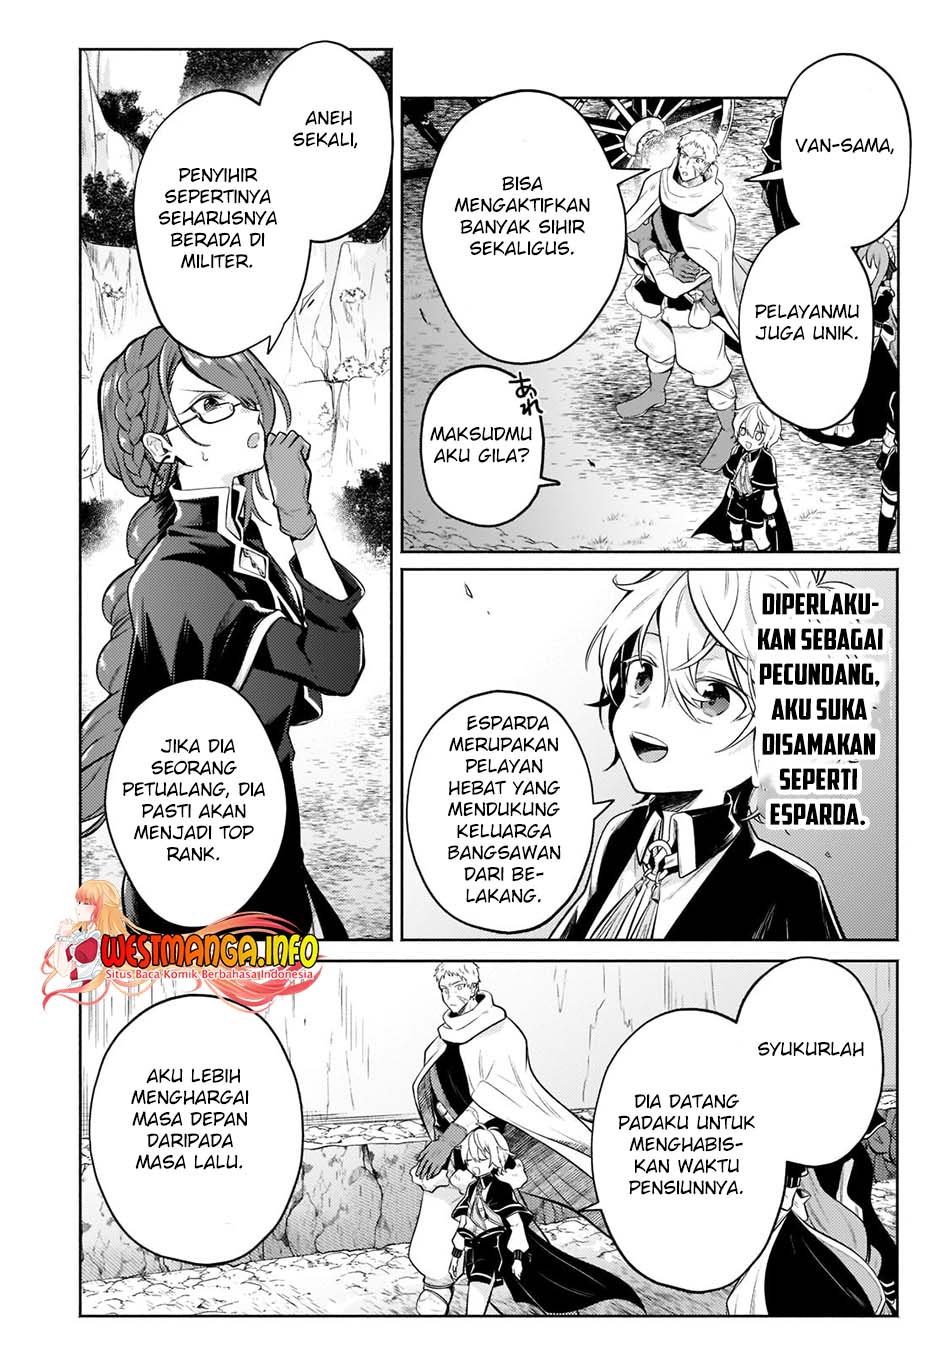 Fun Territory Defense Of The Easy-Going Lord ~The Nameless Village Is Made Into The Strongest Fortified City By Production Magic~ Chapter 09 - 181